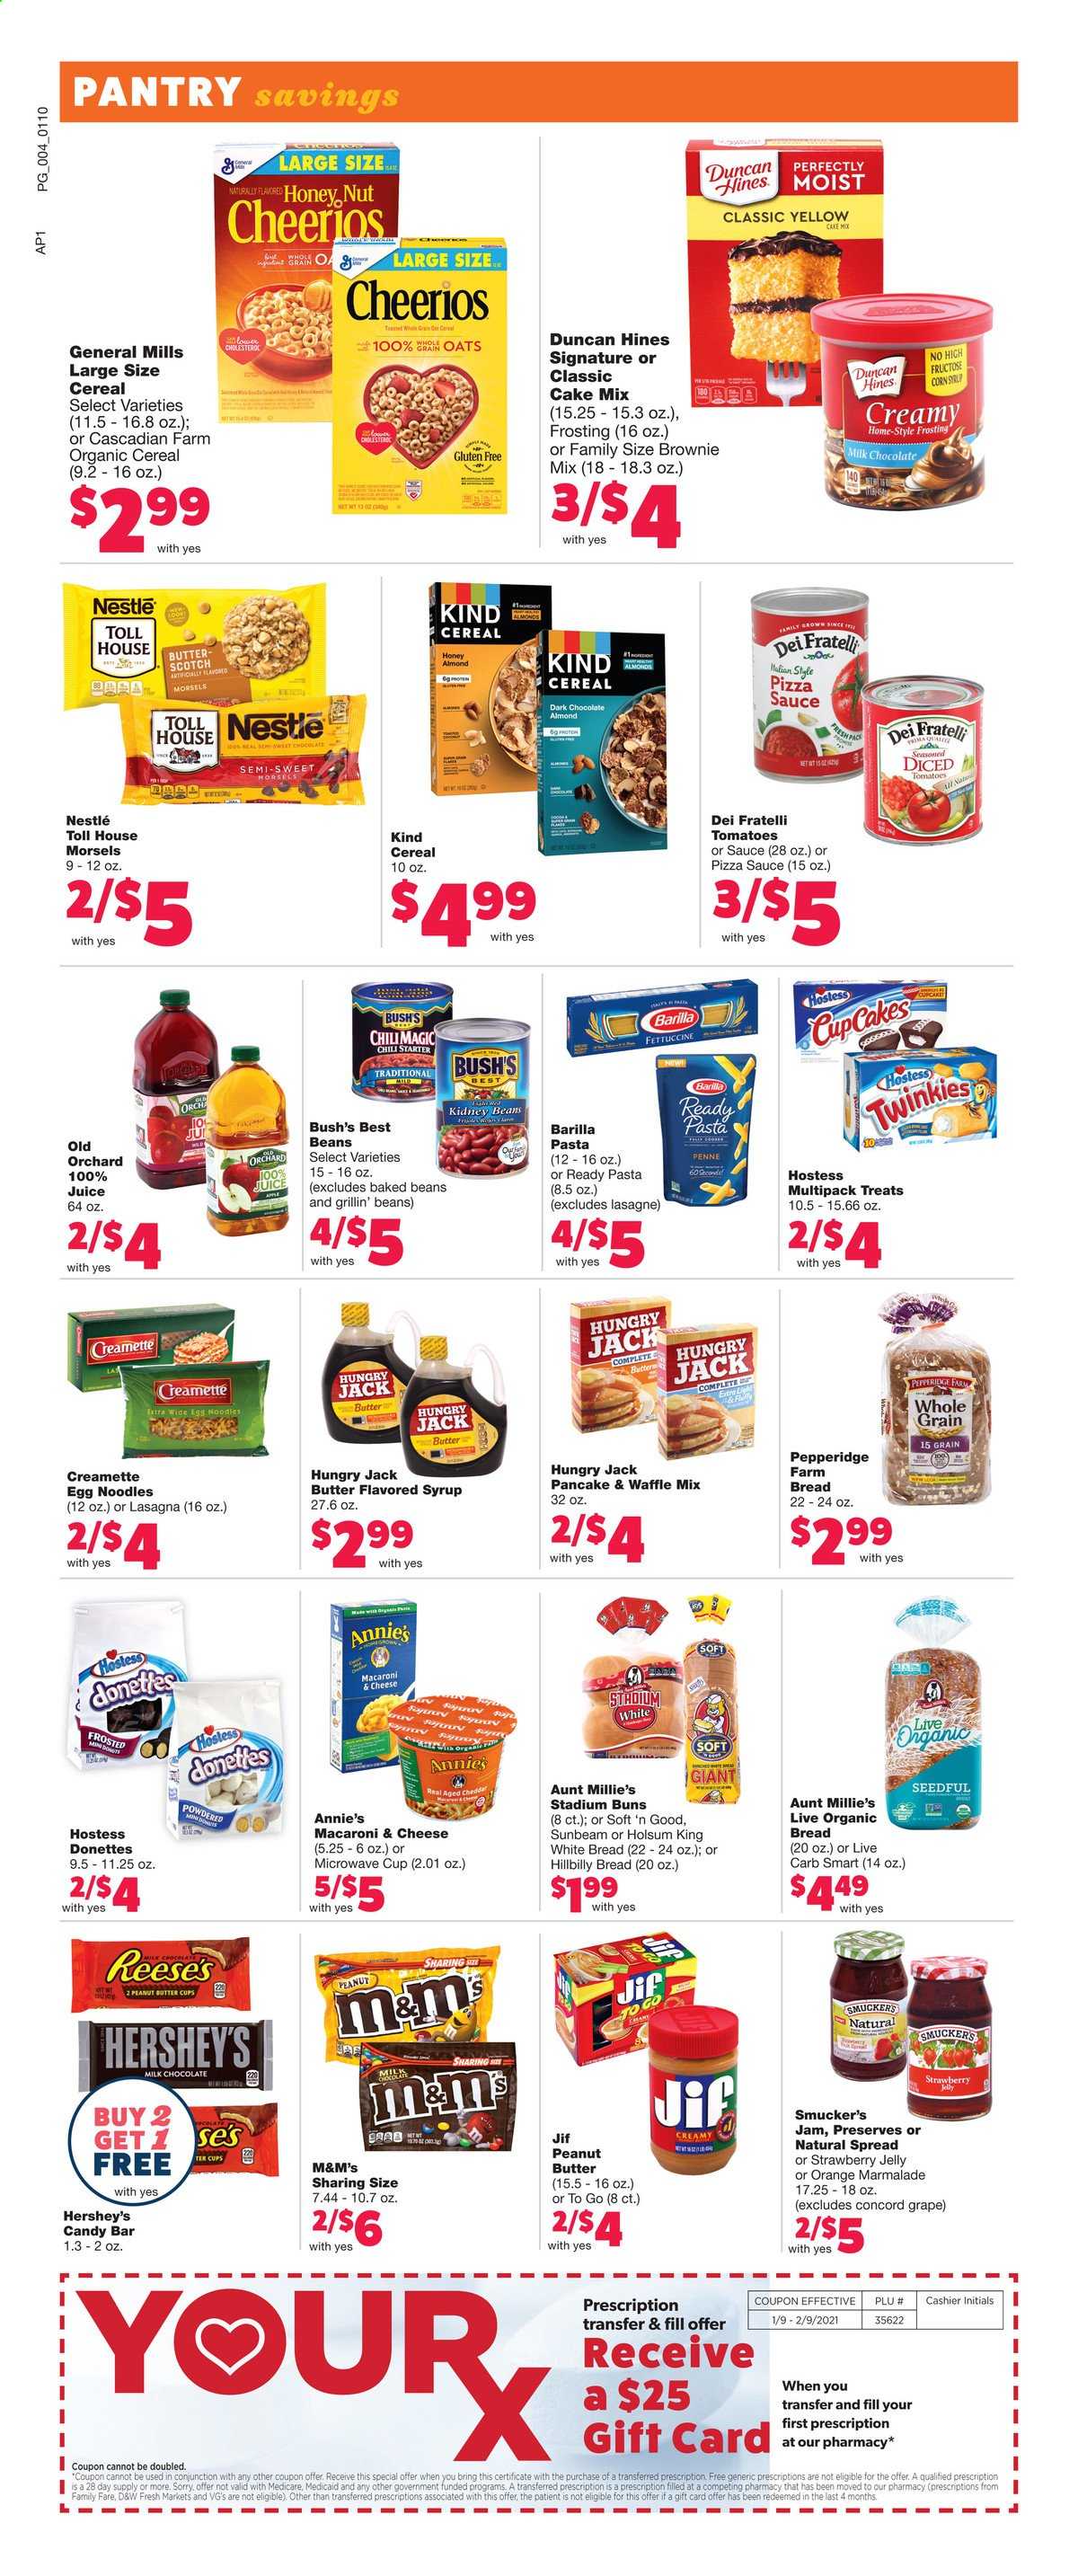 thumbnail - Family Fare Flyer - 01/10/2021 - 01/16/2021 - Sales products - bread, white bread, brownie mix, cake mix, pancakes, buns, oranges, macaroni & cheese, pizza, Barilla, Annie's, cheddar, jelly, Reese's, Hershey's, beans, corn, milk chocolate, Nestlé, chocolate, M&M's, dark chocolate, peanut butter cups, frosting, oats, kidney beans, baked beans, cereals, Cheerios, lasagne sheets, egg noodles, pasta, noodles, penne, Creamette, honey, fruit jam, syrup, Jif, almonds, juice, Ron Pelicano, Sunbeam. Page 6.